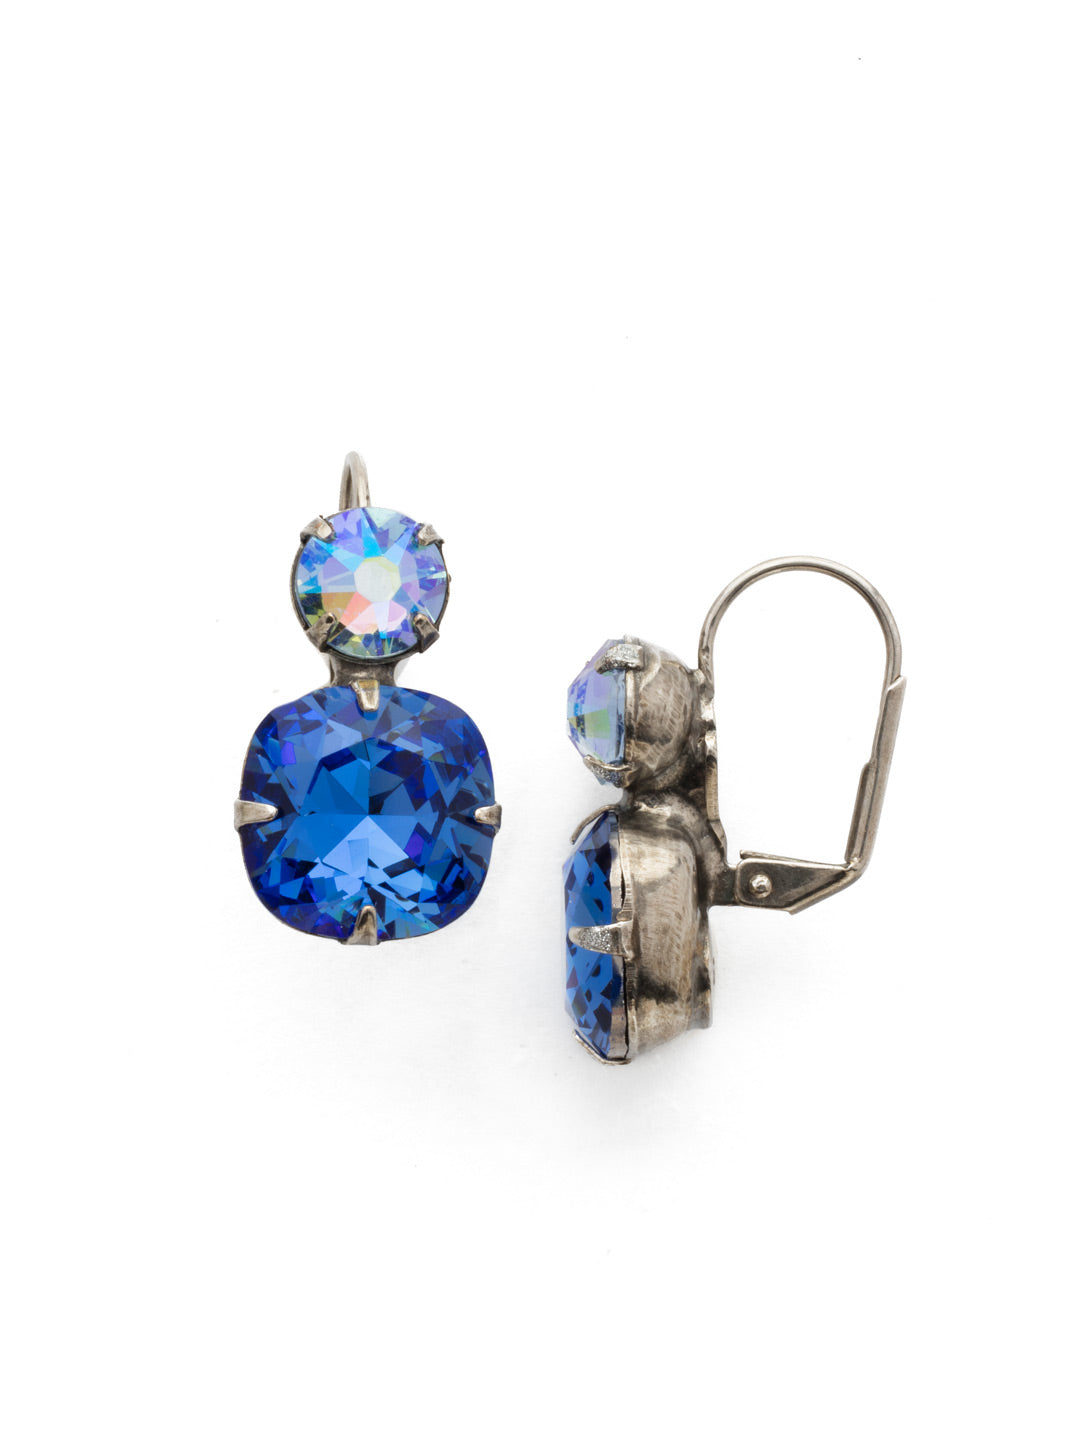 On The Edge Dangle Earrings - ECL4ASSAP - <p>It's simple - round and cushion cut crystals on a french wire earring. These earrings go with anything! You can rest easy knowing you have the perfect go-to pair of earrings in your jewelry box. From Sorrelli's Sapphire collection in our Antique Silver-tone finish.</p>